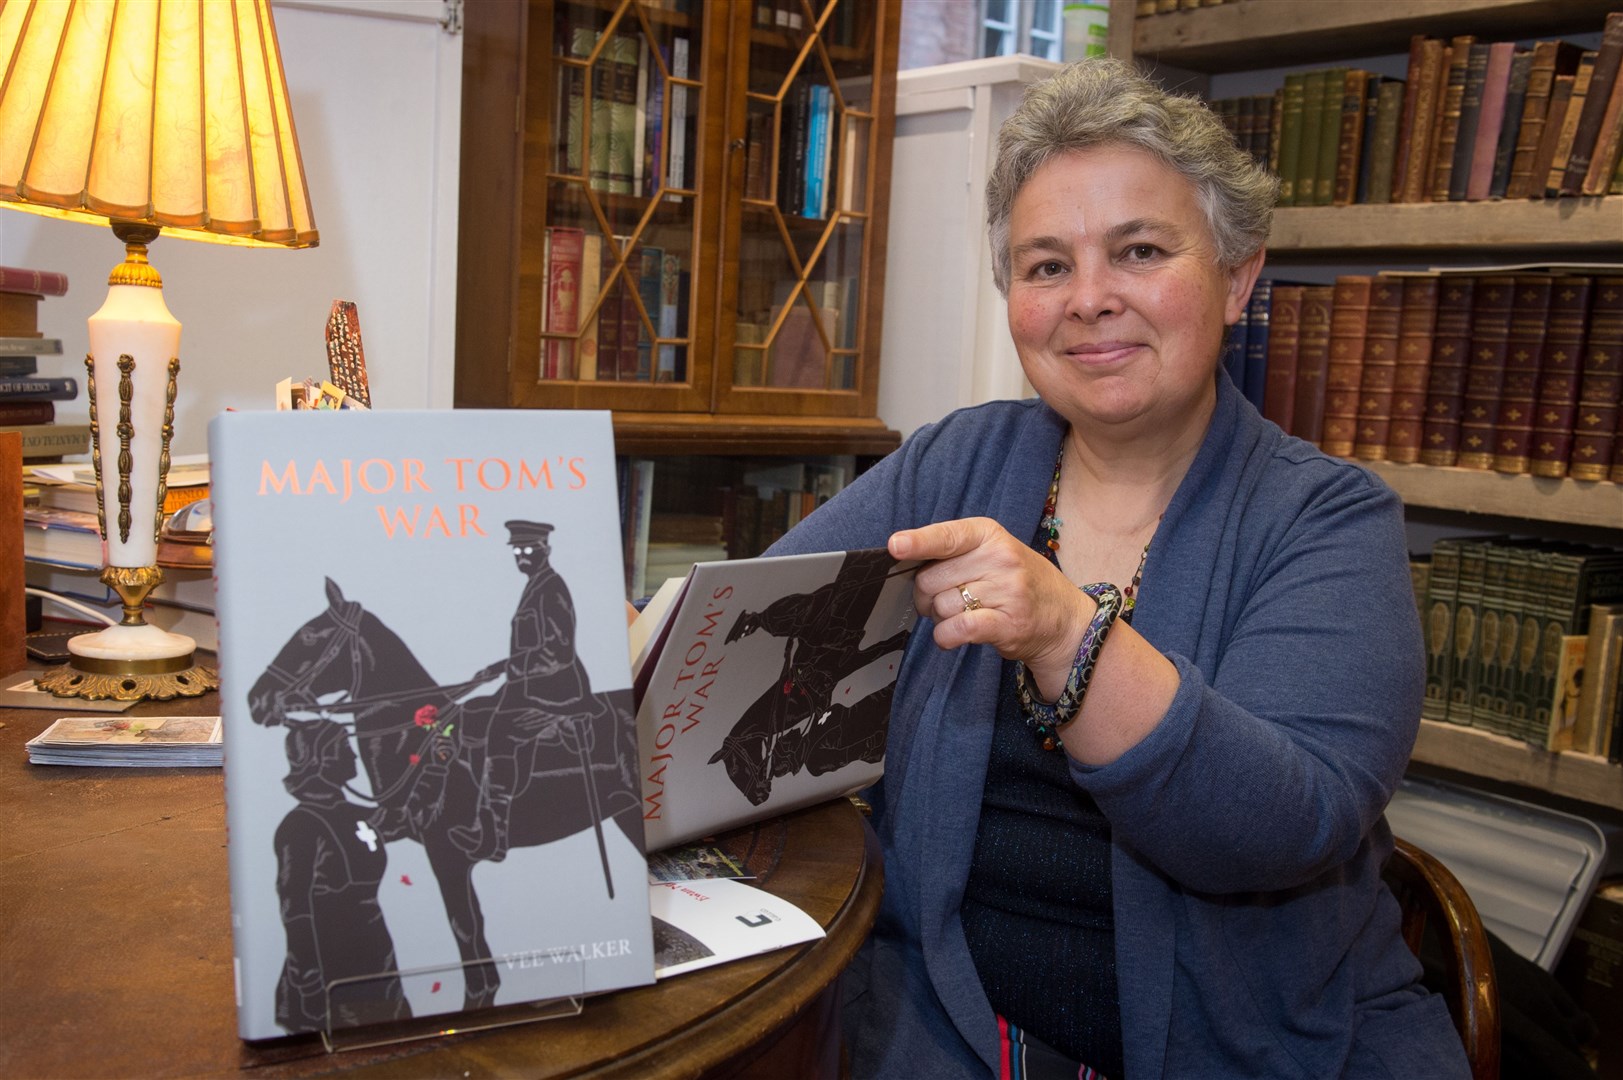 Black Isle author Vee Walker at the local launch of her prize-winning book, Major Tom's War. She was named one of the winners in the Hugh Miller Writing Competition. Picture: Callum Mackay